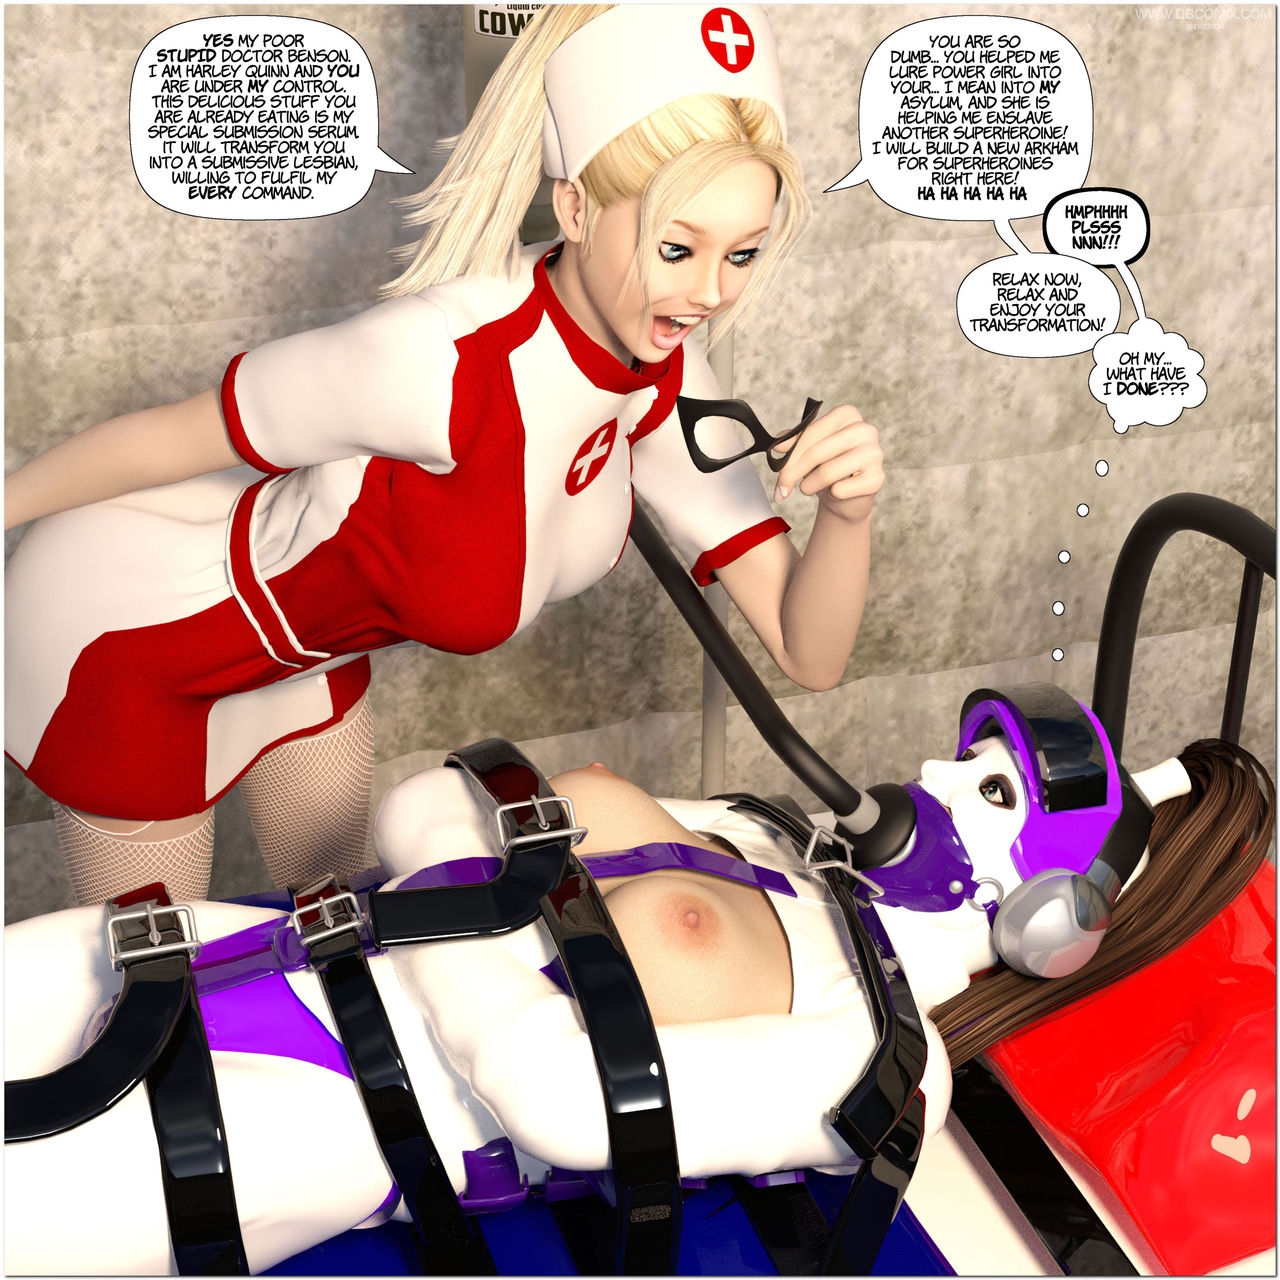 [DBComix] New Arkham For Superheroines 1 2nd Edition - Humiliation and Degradation of Power Girl 67